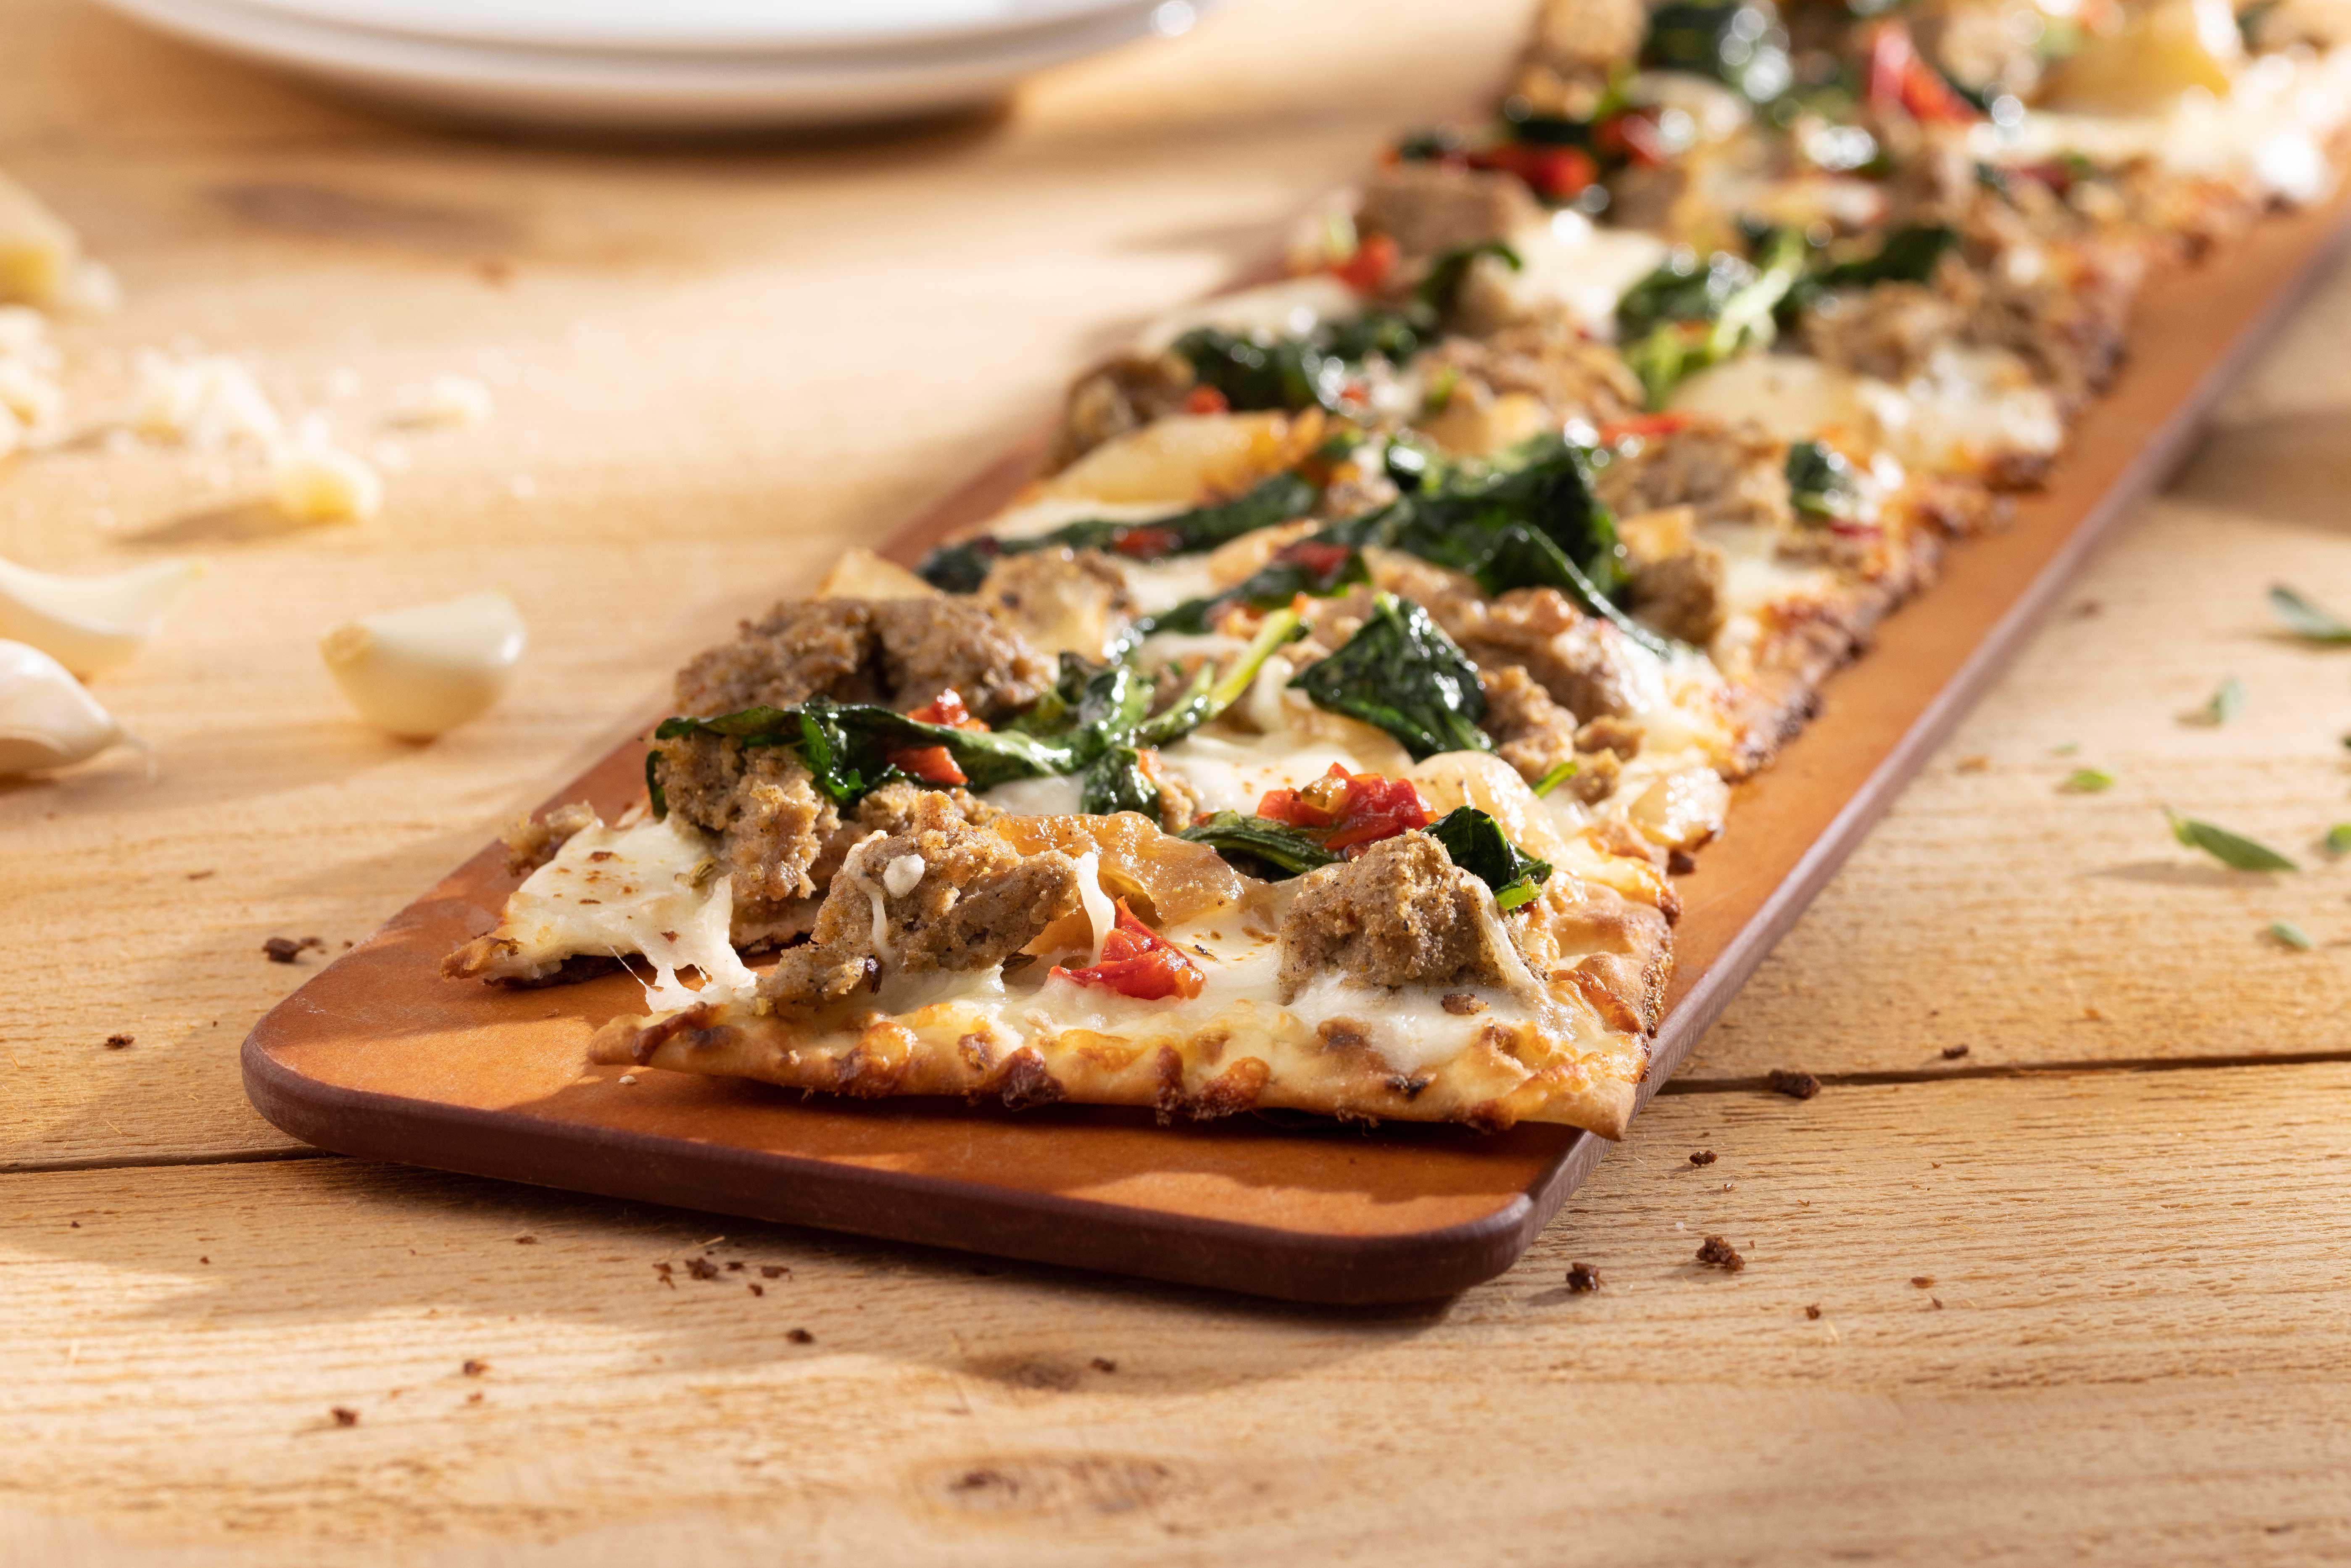 Sausage and Baby Kale Flatbread - housemade Italian sausage, cipollini onions, spicy pepper relish